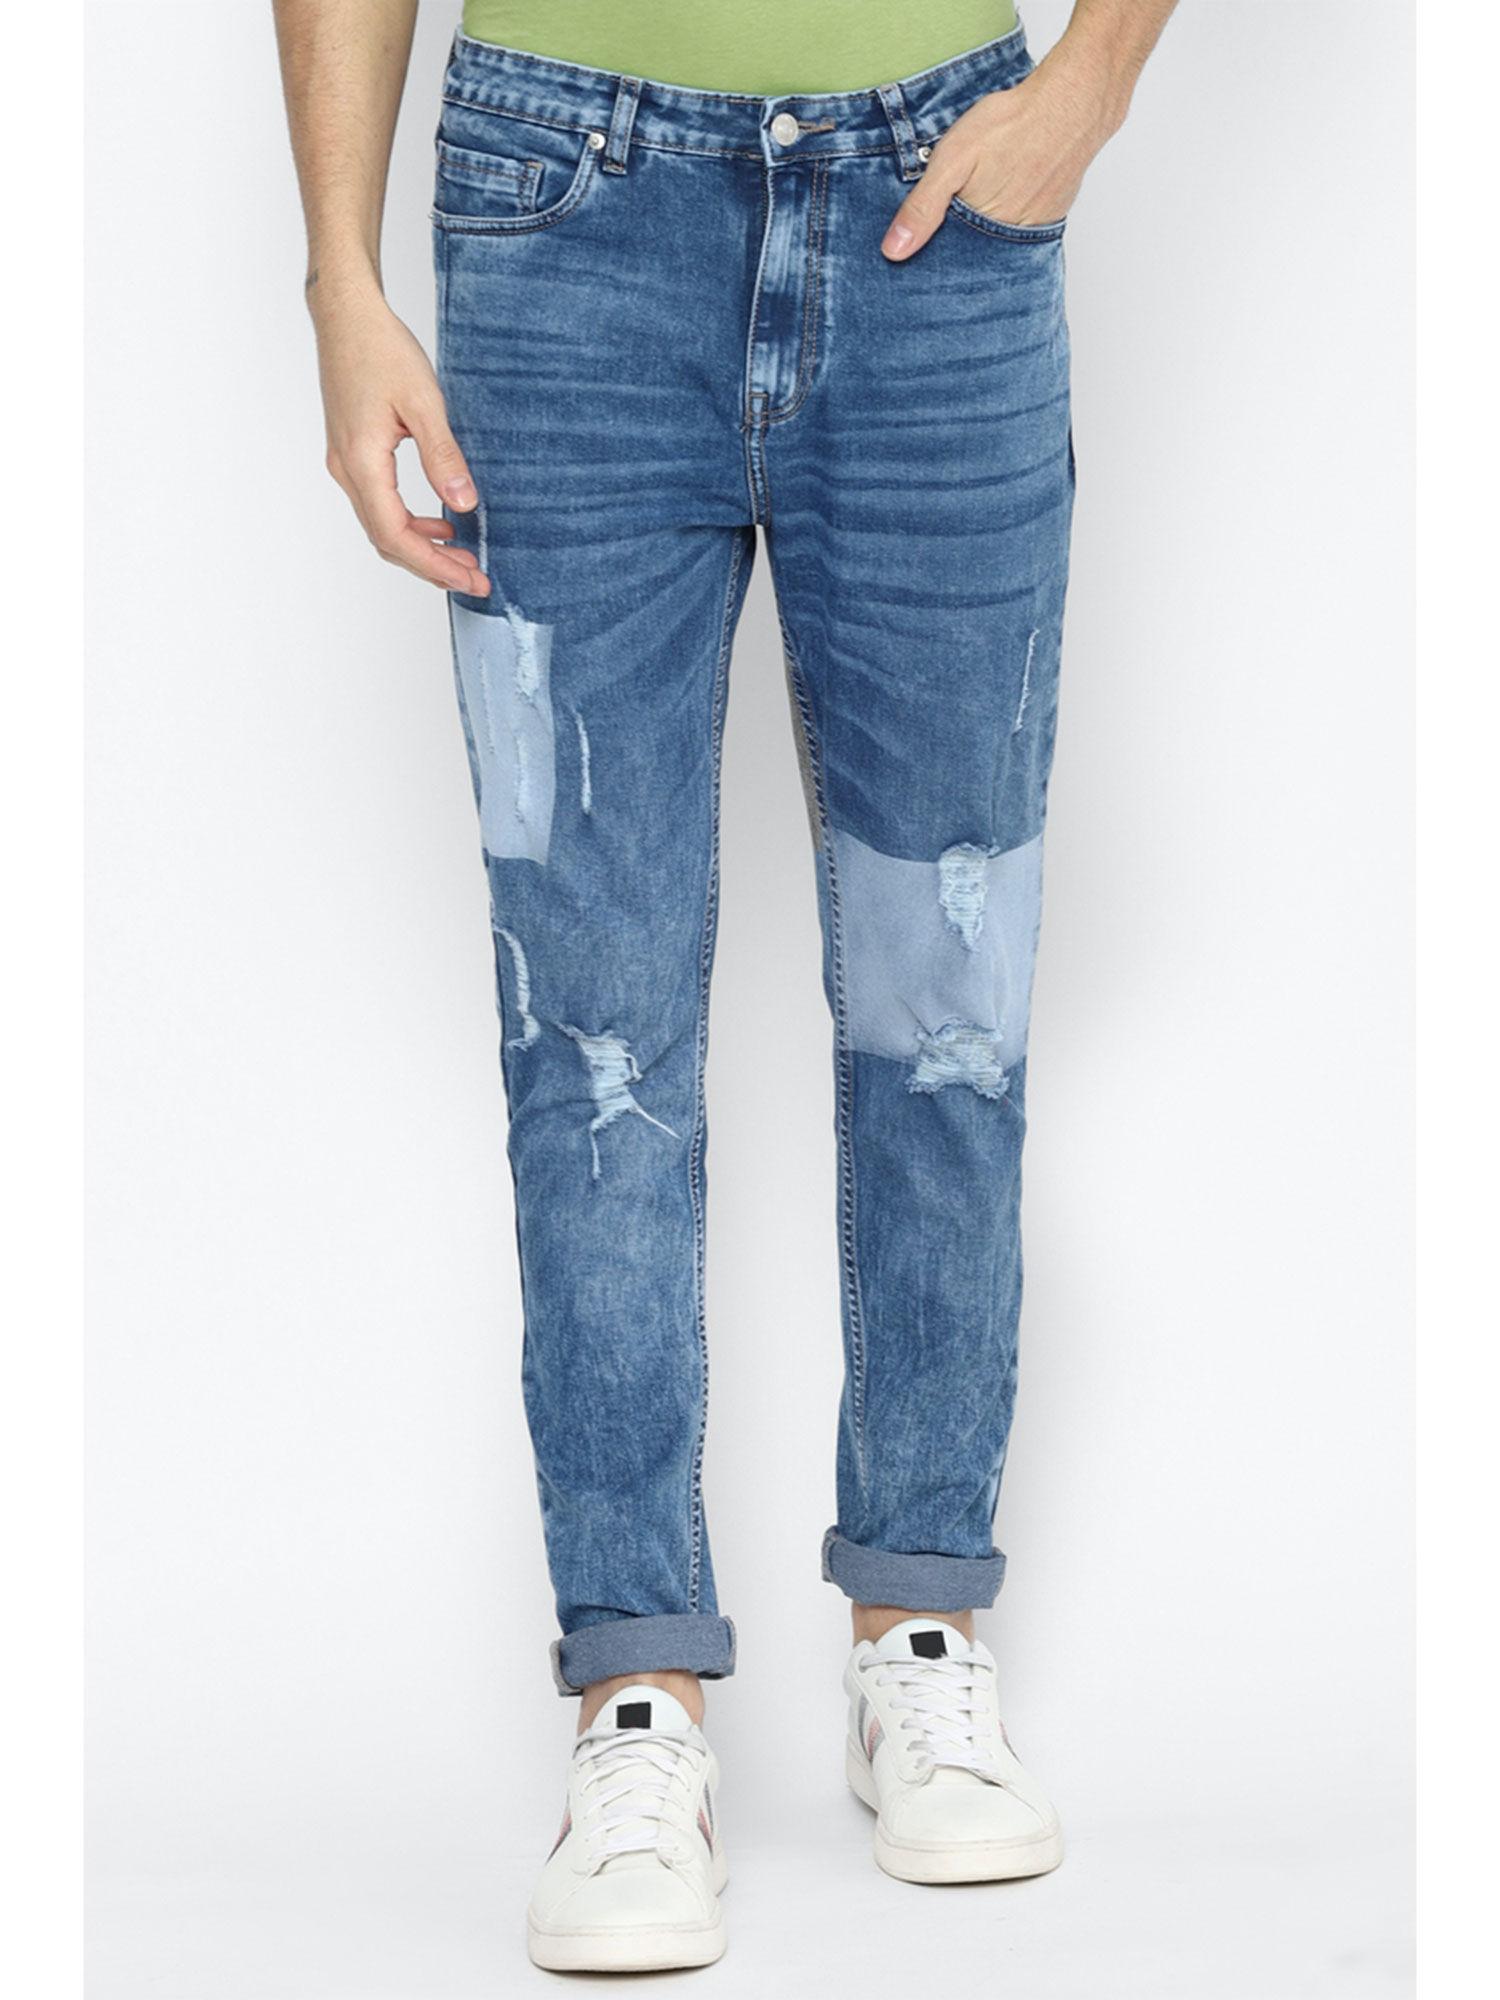 patterned classic blue jeans